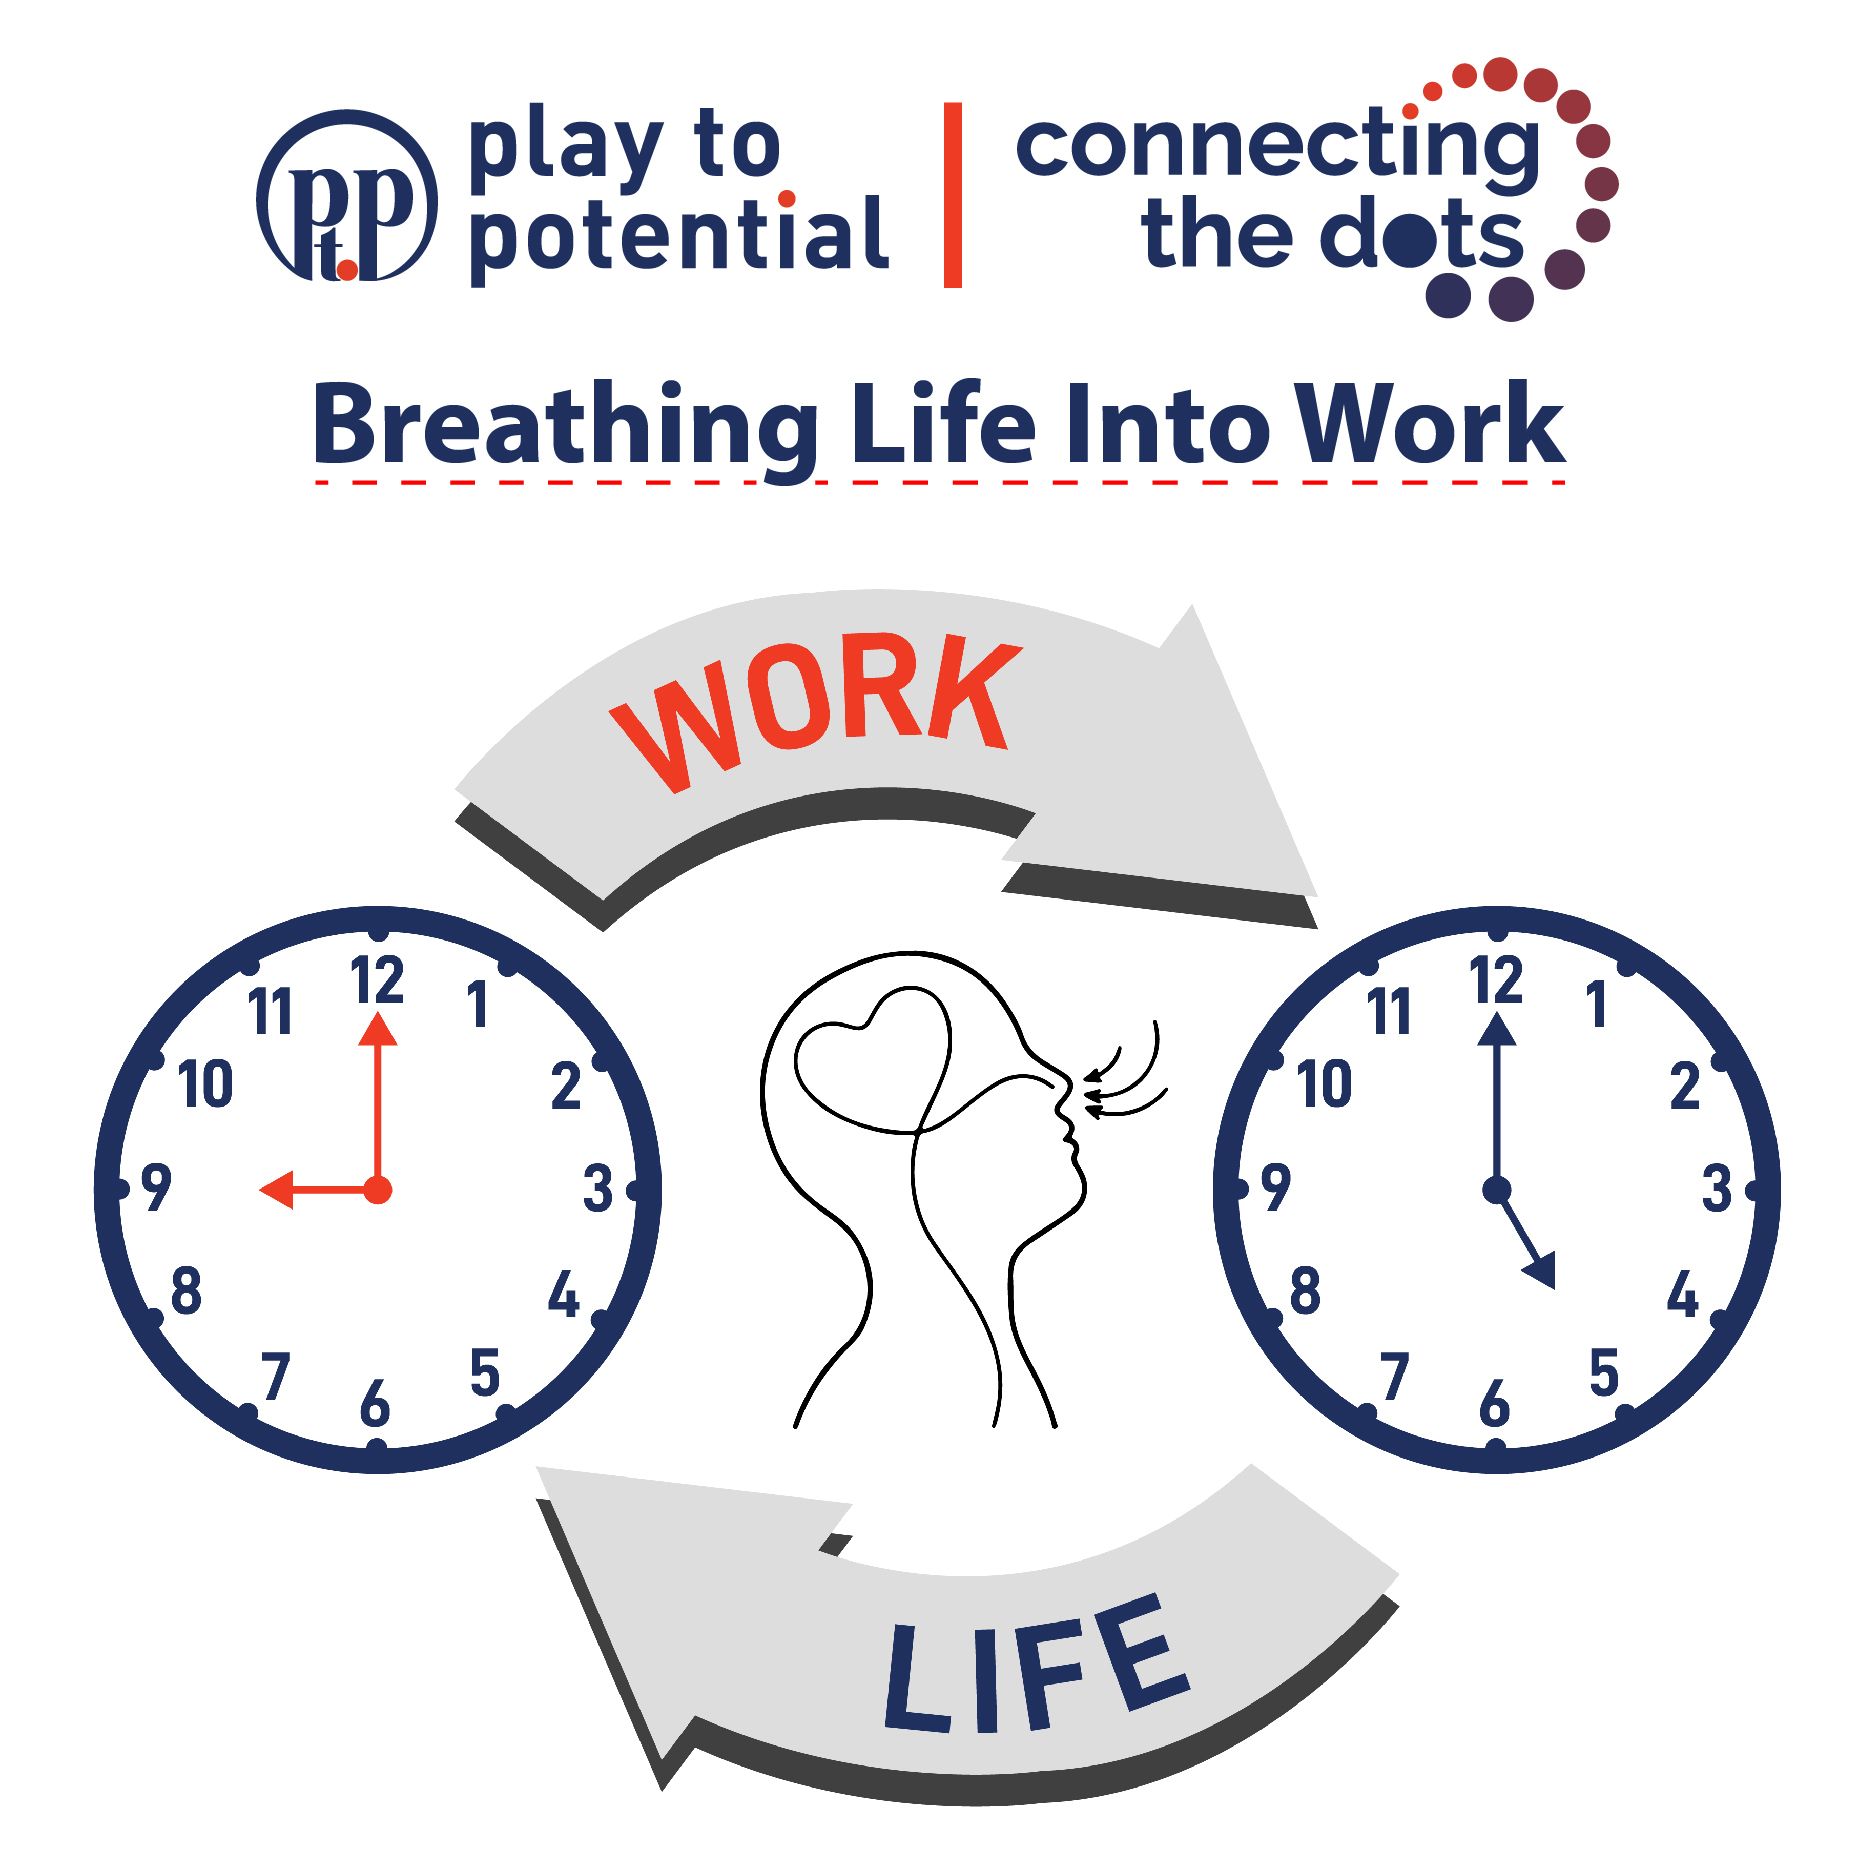 681: EP5: Connecting the Dots - Breathing Life into Work